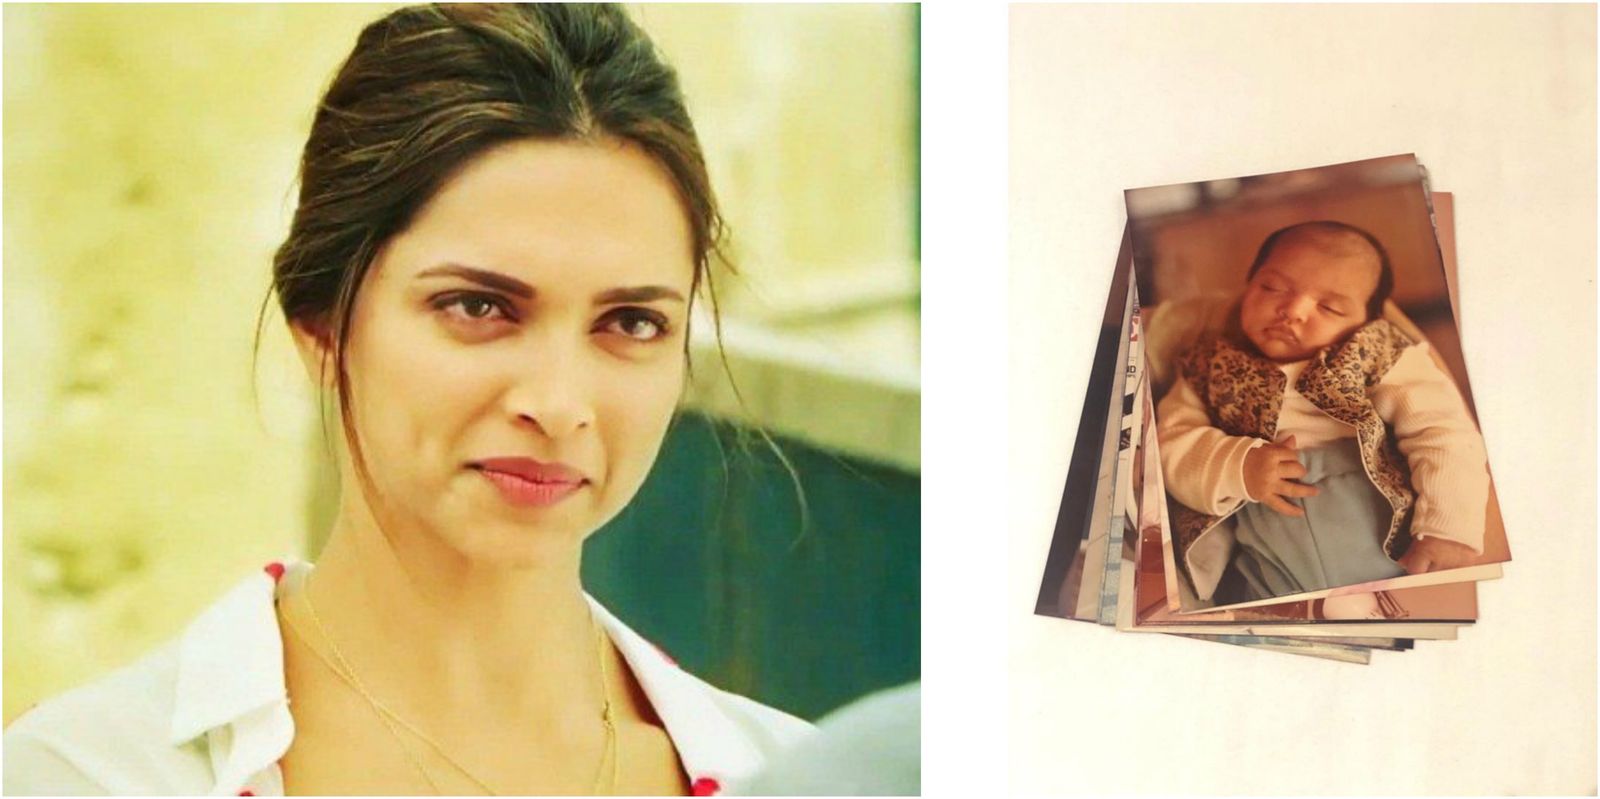 Deepika Padukone Just Shared Some Childhood Photos And We Might Just Die Of Cuteness Overdose